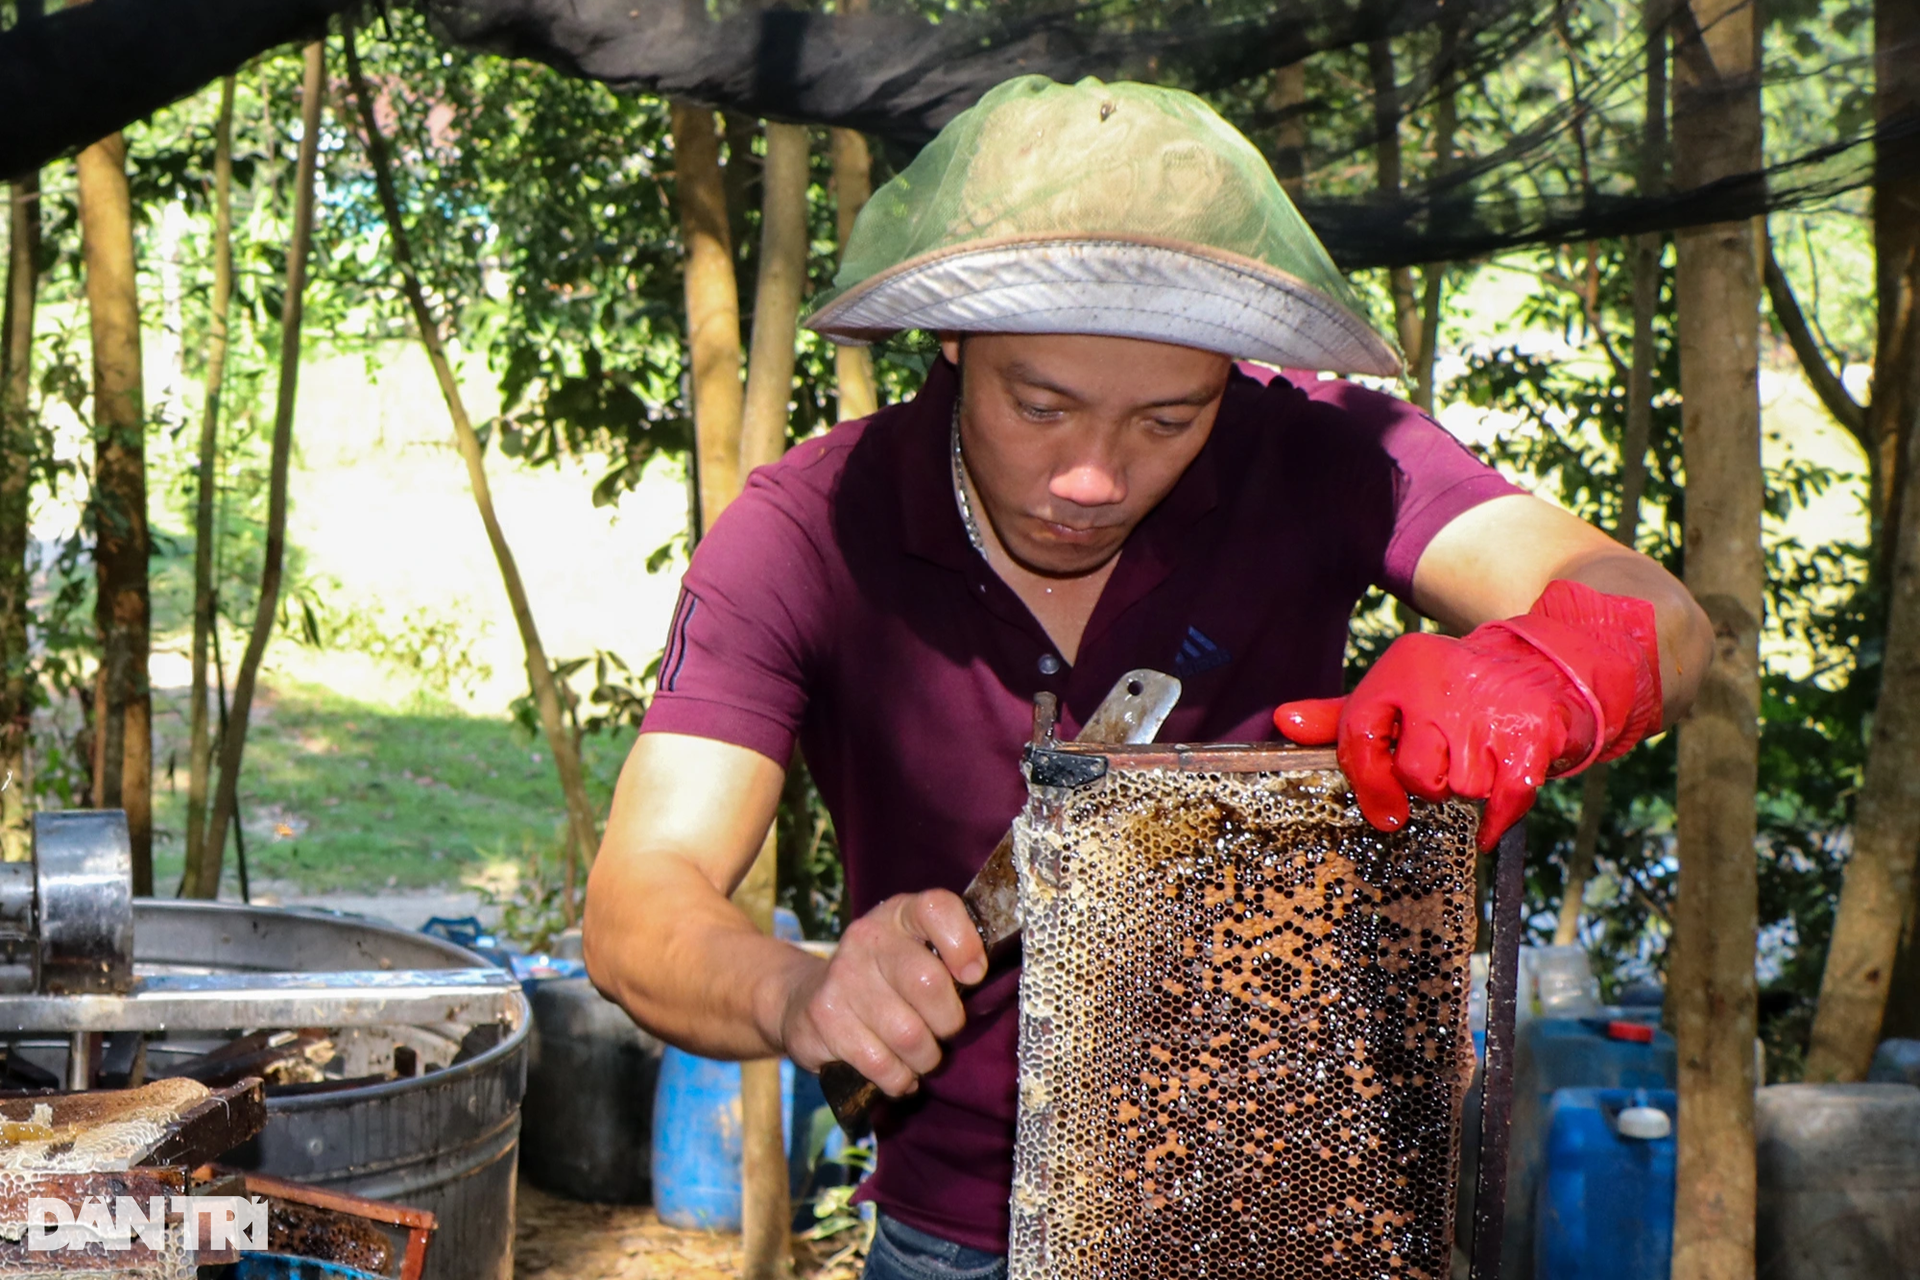 bee farm, honey spin, labor, seasonal workers, eat seasonal bees to make honey, seasonal workers earn 250,000 vnd in 4 hours